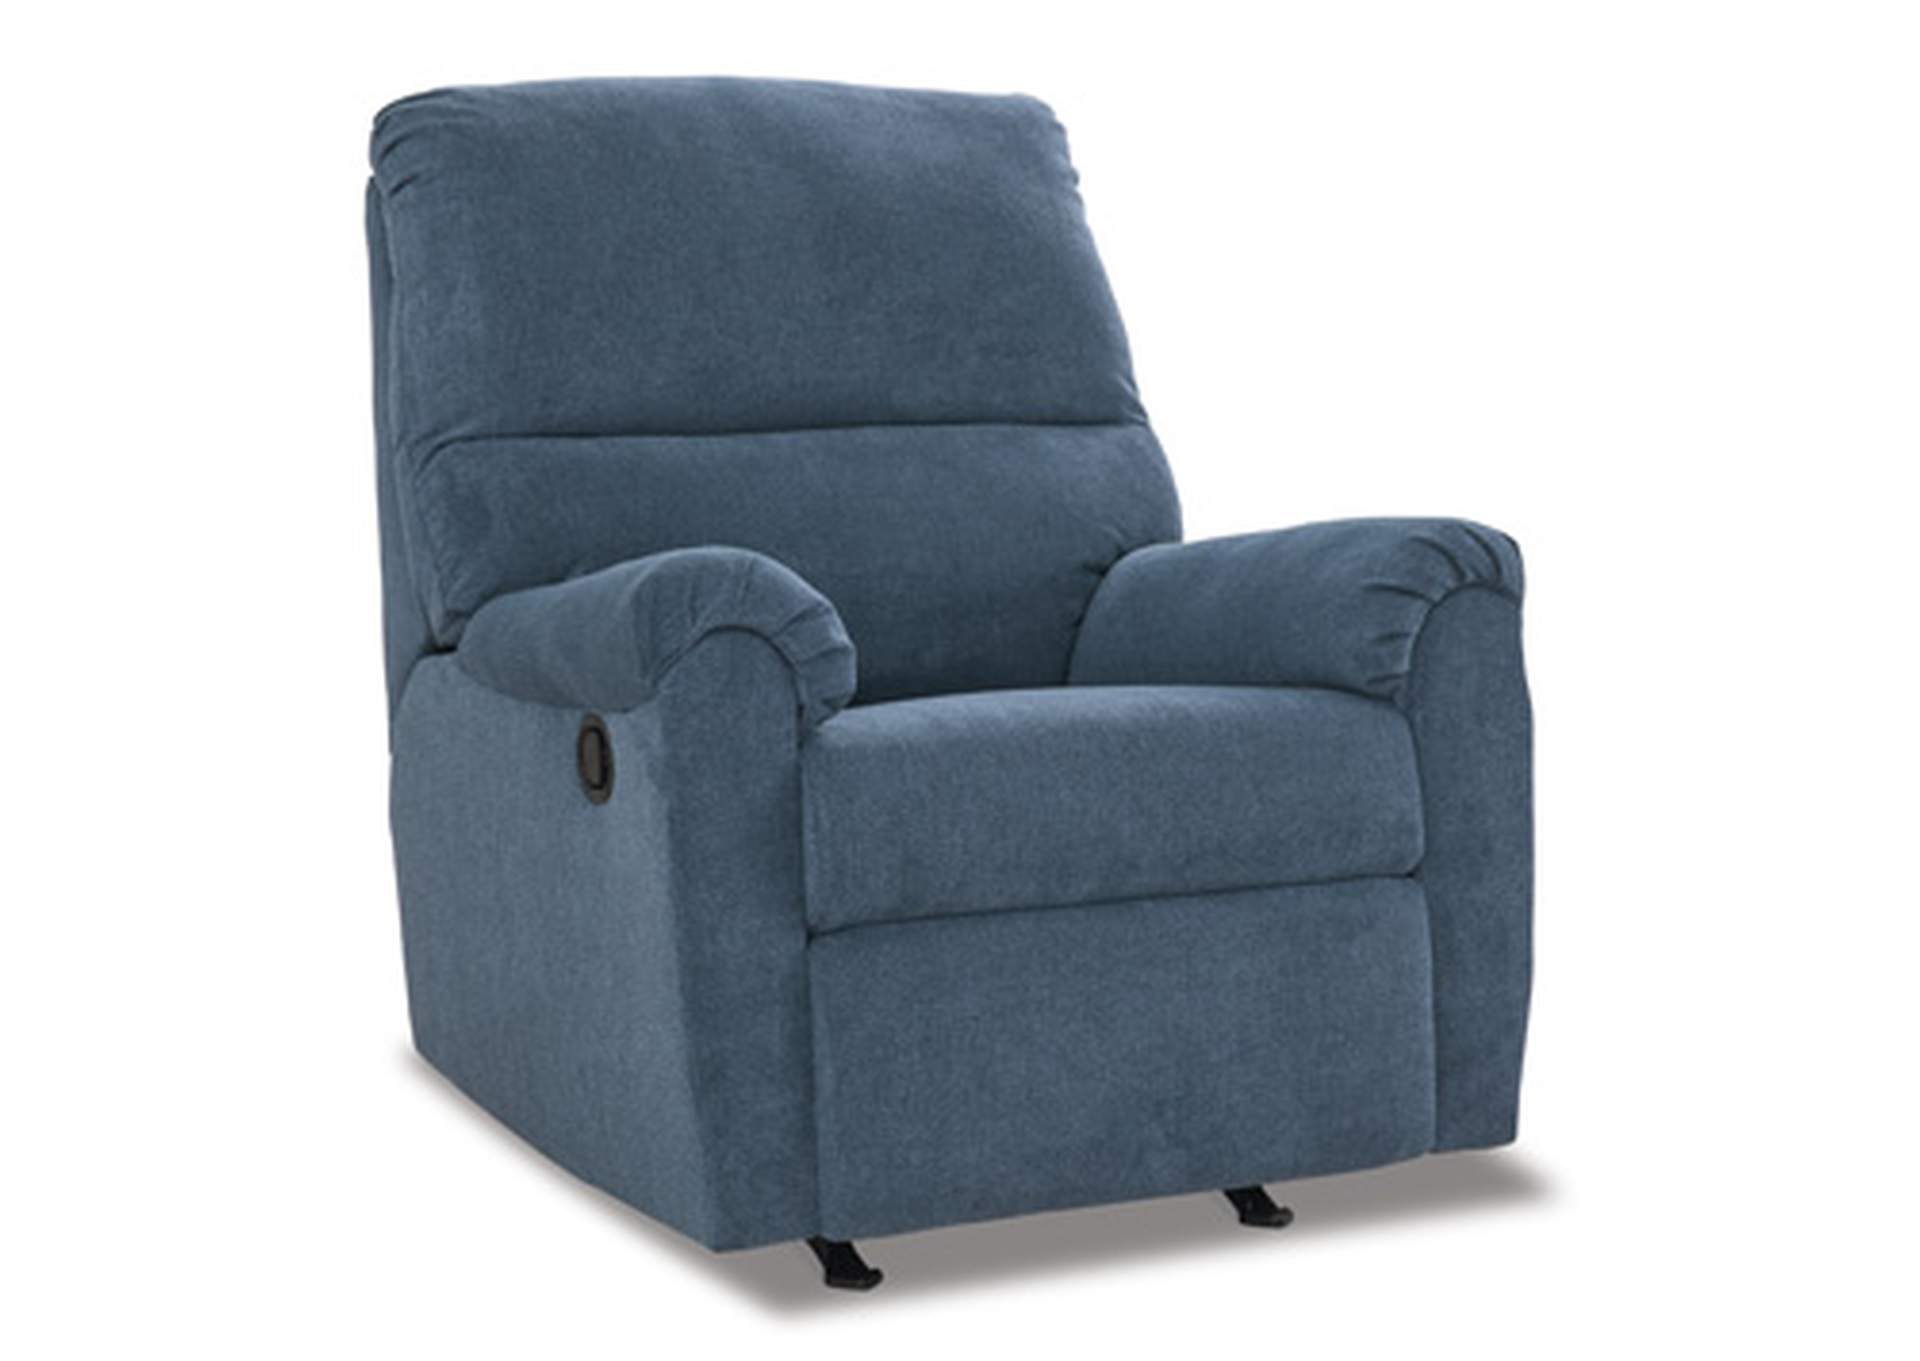 MIravel Recliner,Signature Design By Ashley